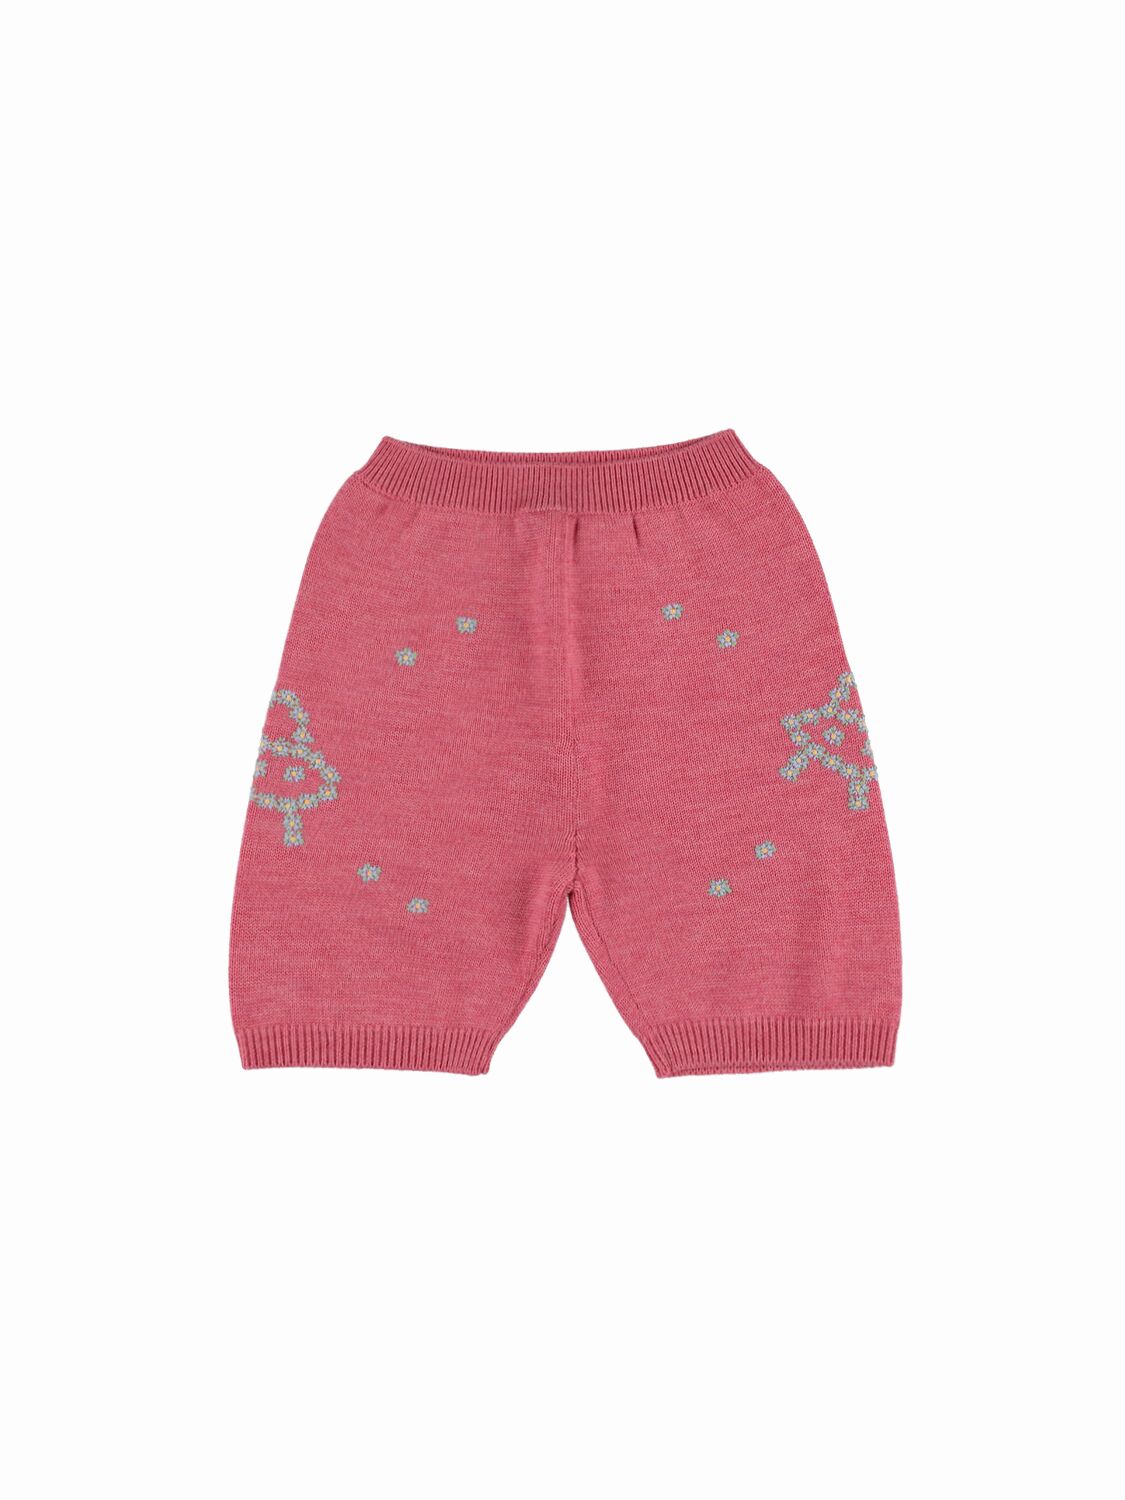 GUCCI EMBROIDERED WOOL SHORTS